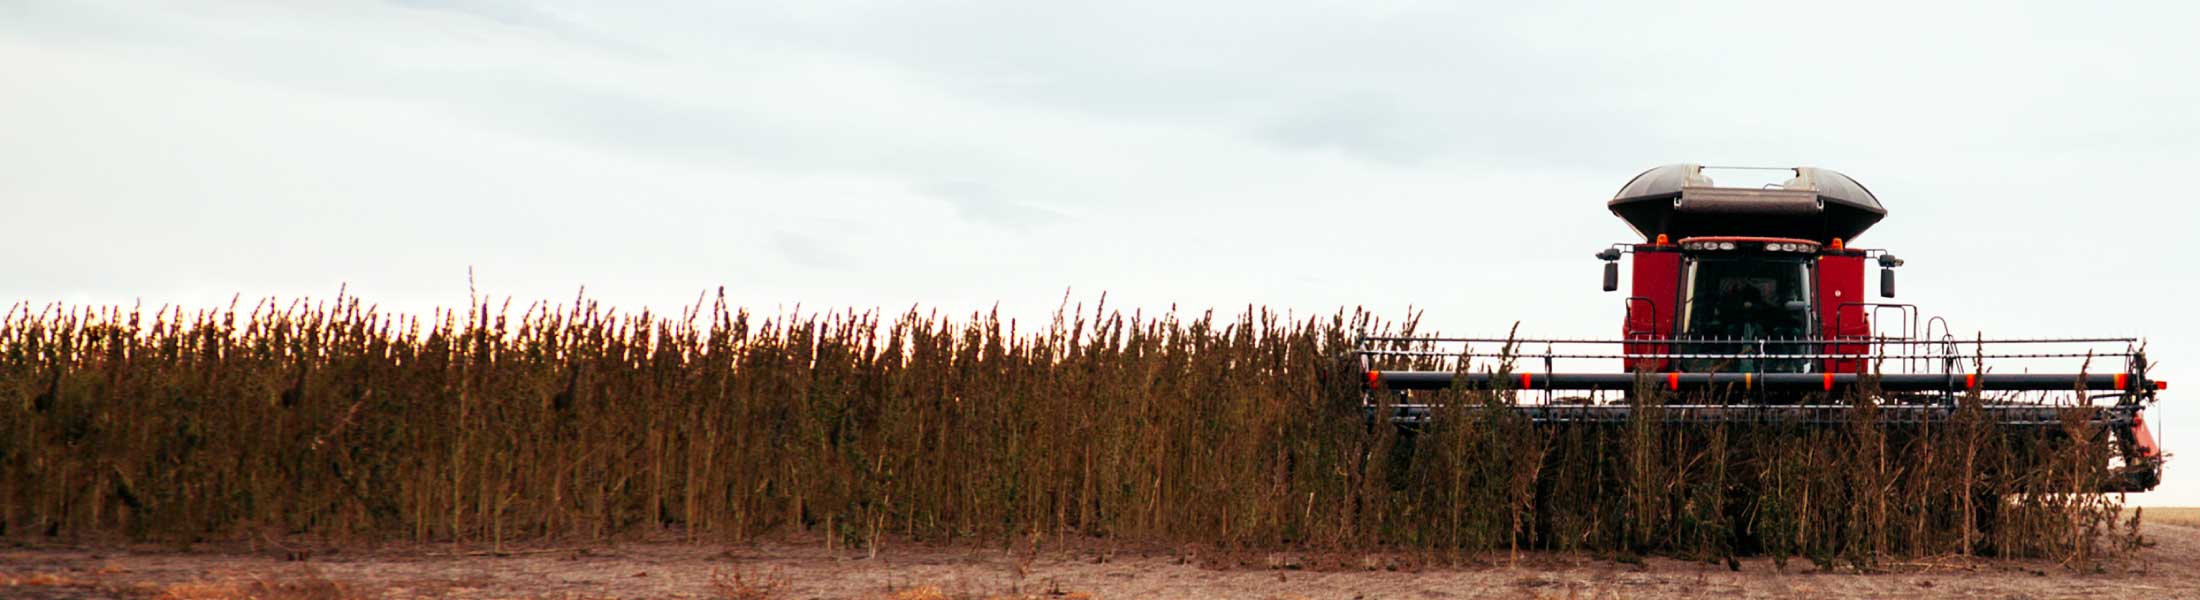 An industrial hemp crop is being harvested mechanically.